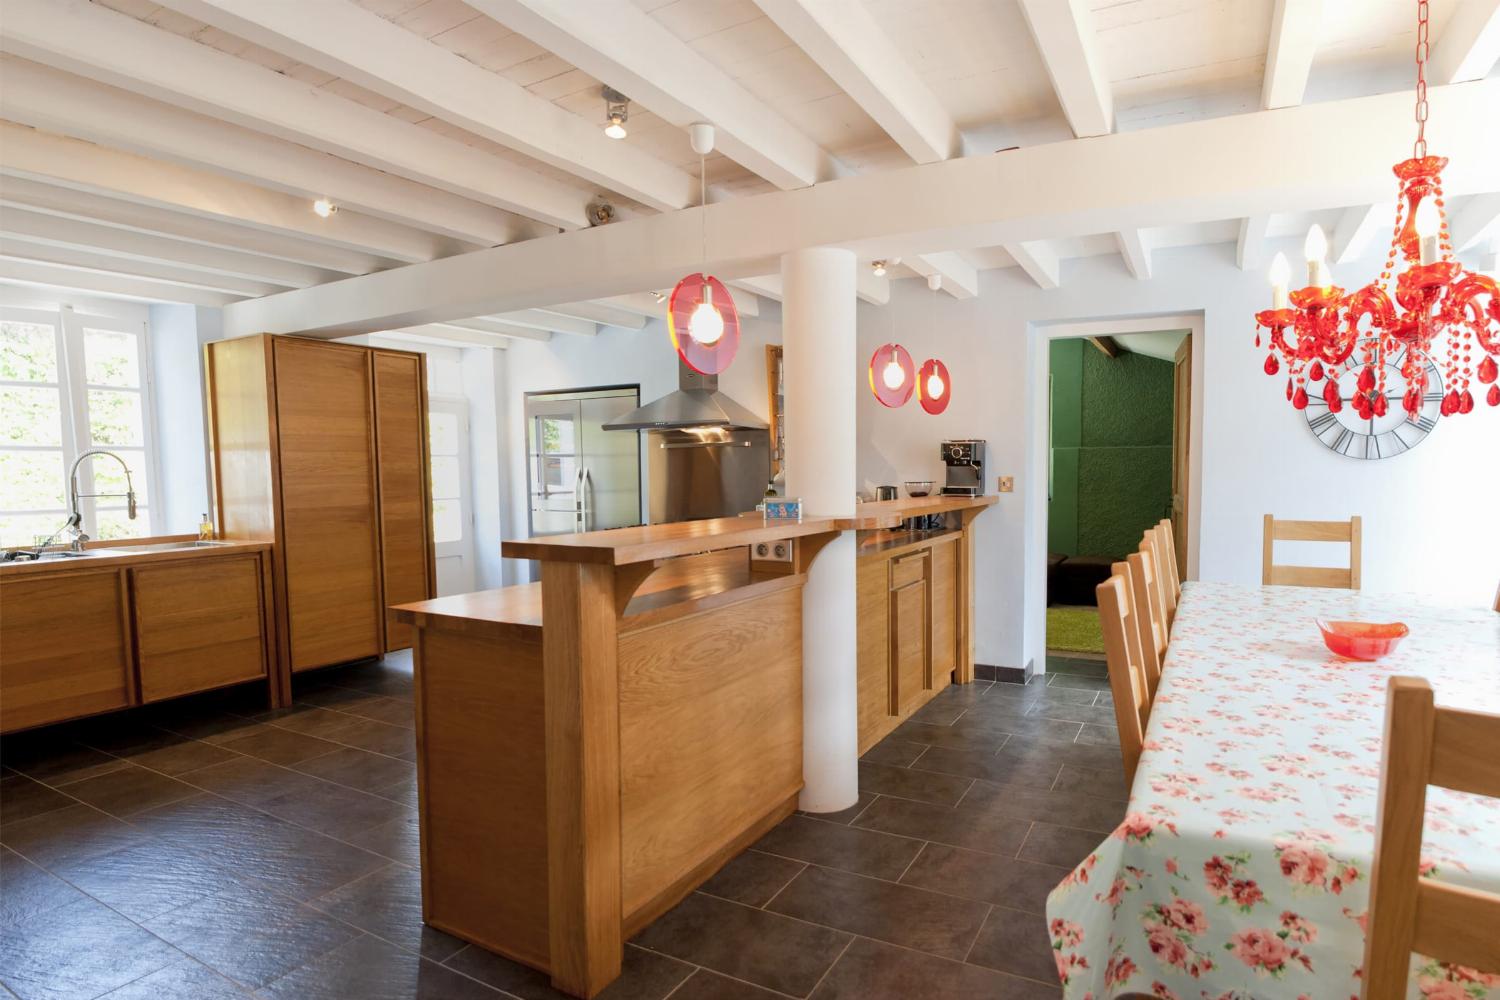 Kitchen | Holiday accommodation in South West France